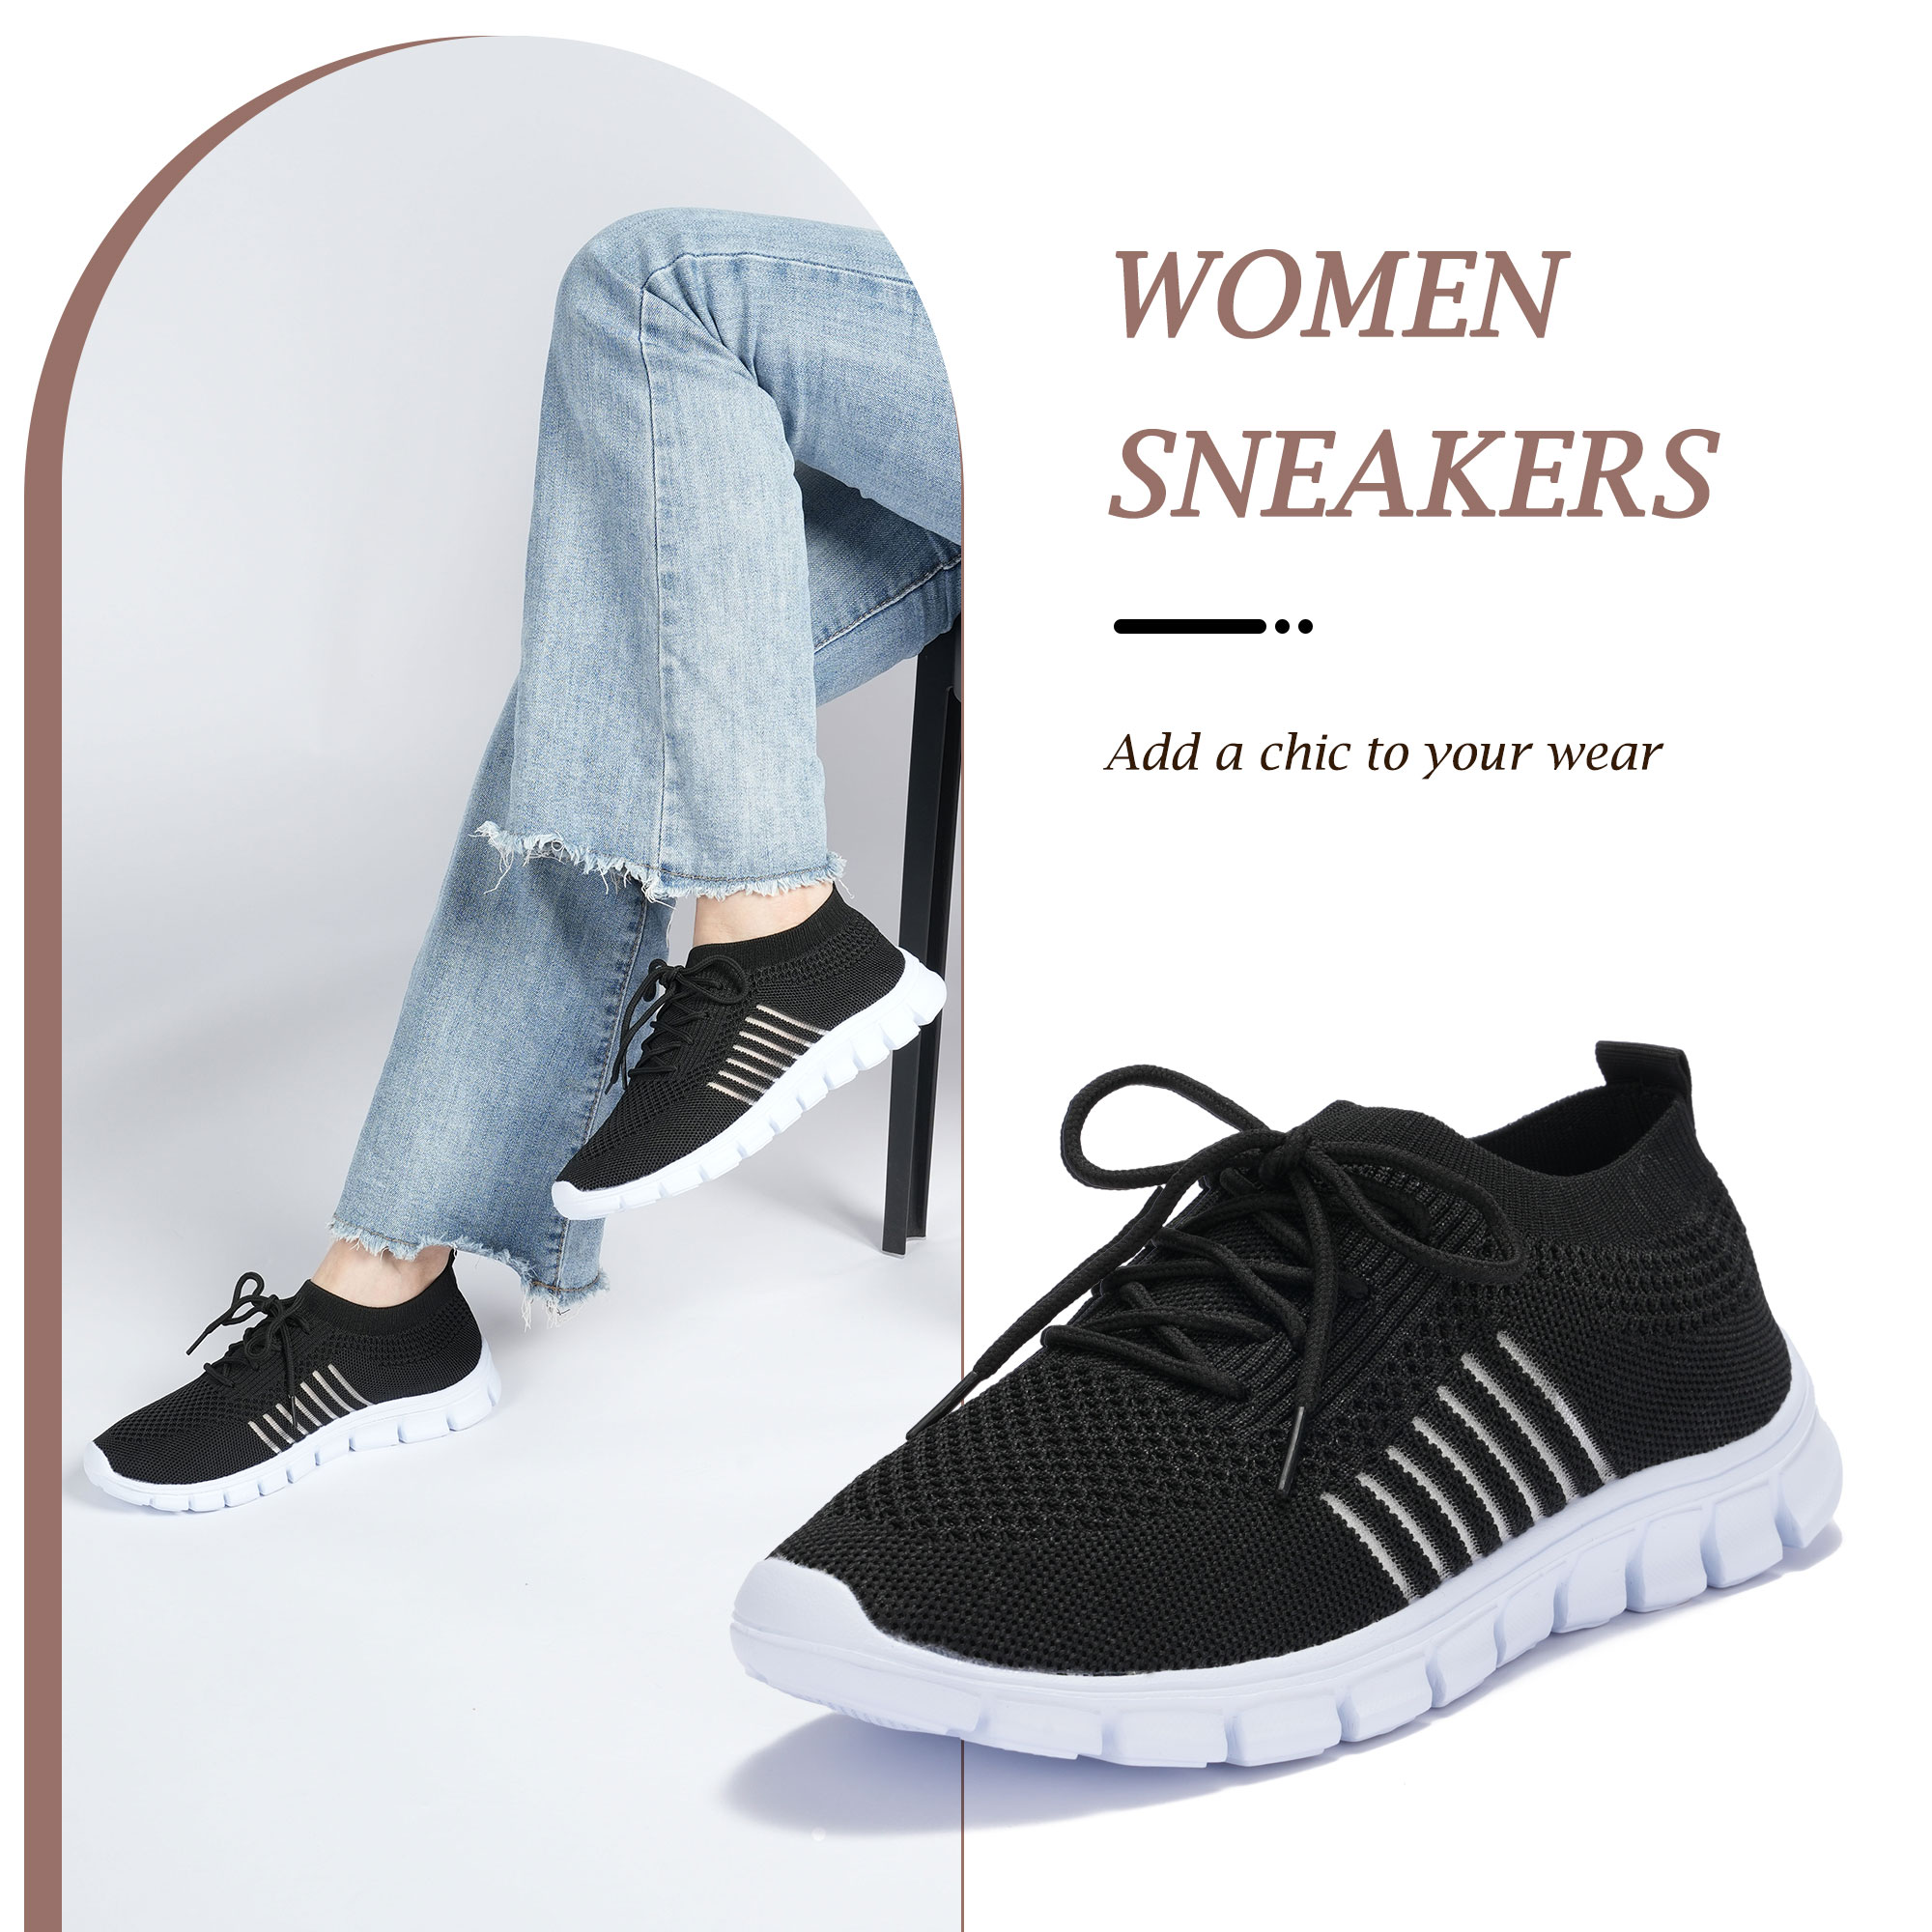 NEW Lightweight Running Shoes for Women Mesh Lace up Sneakers ...